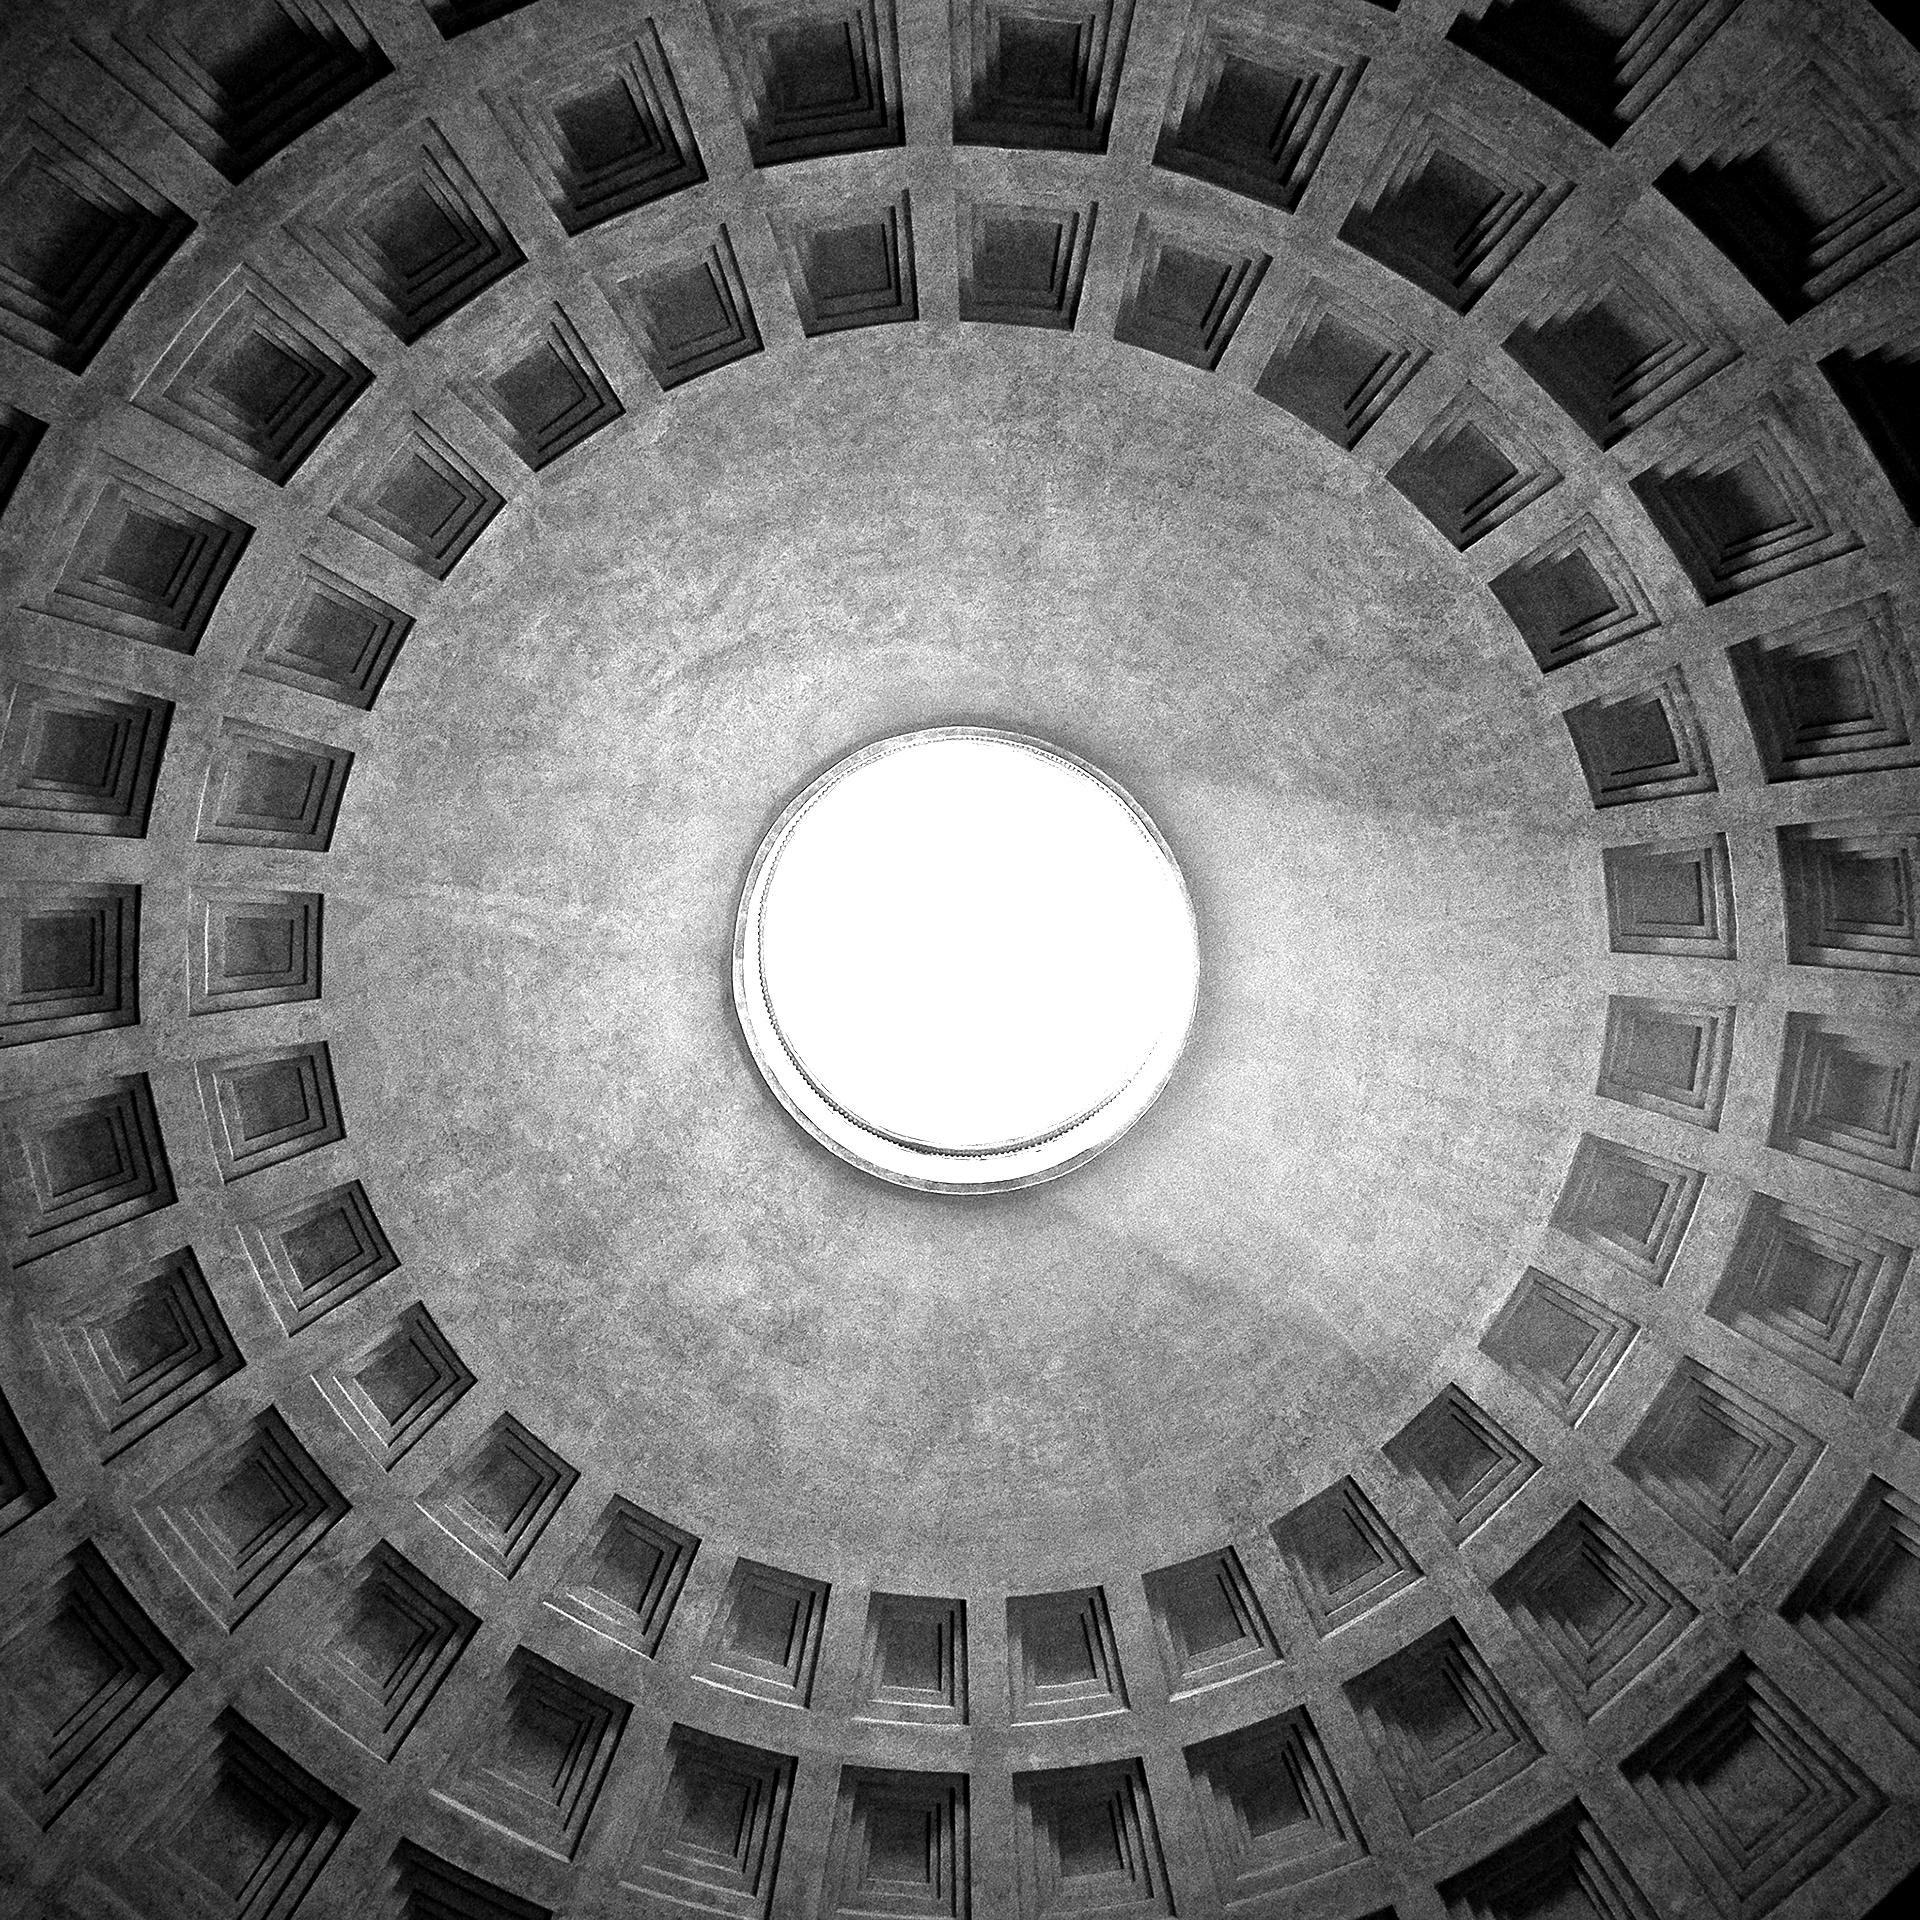 PANTHEON #03 - collection: "Armony and Perfection" - Alberto Desirò
A sanctuary for all Gods, each equal to the other, of equal importance.
A temple shaped like the Earth and the stars sphere.
Like the Earth where all seeds of the eternal fire are